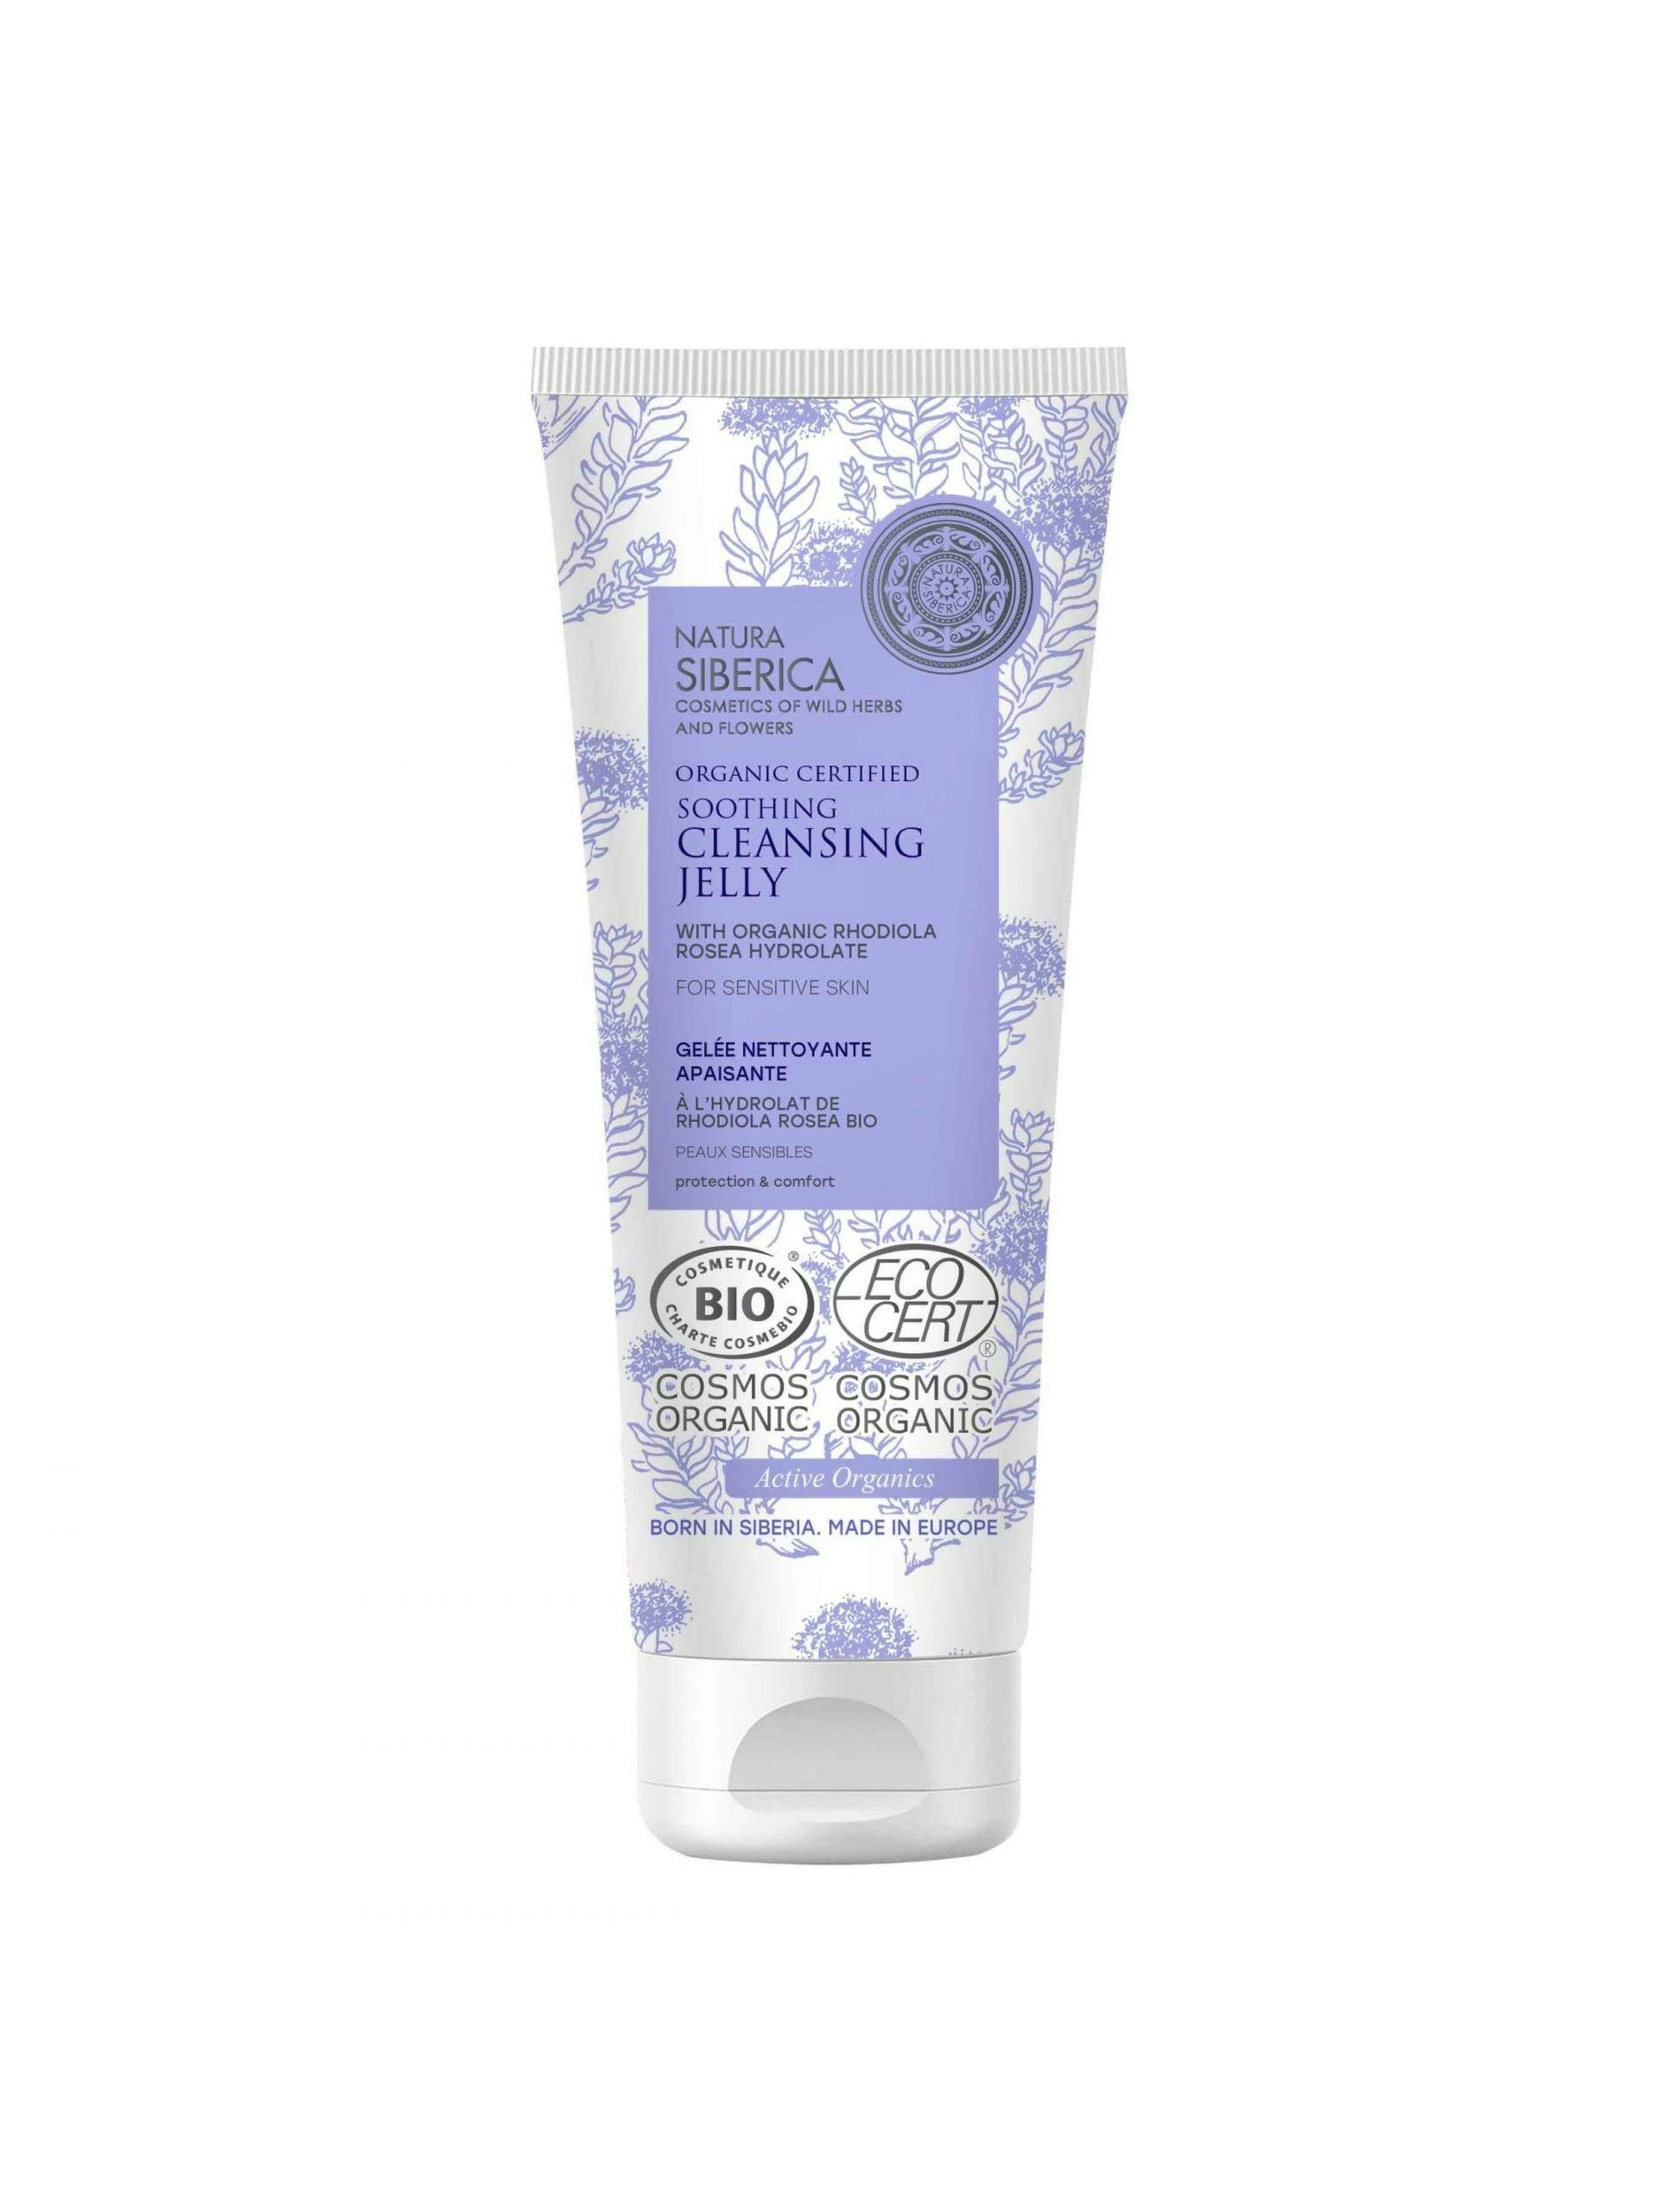 Prevail Afskedige Gentage sig Natura Siberica Soothing Cleansing Jelly 140 ml - 34.95 kr